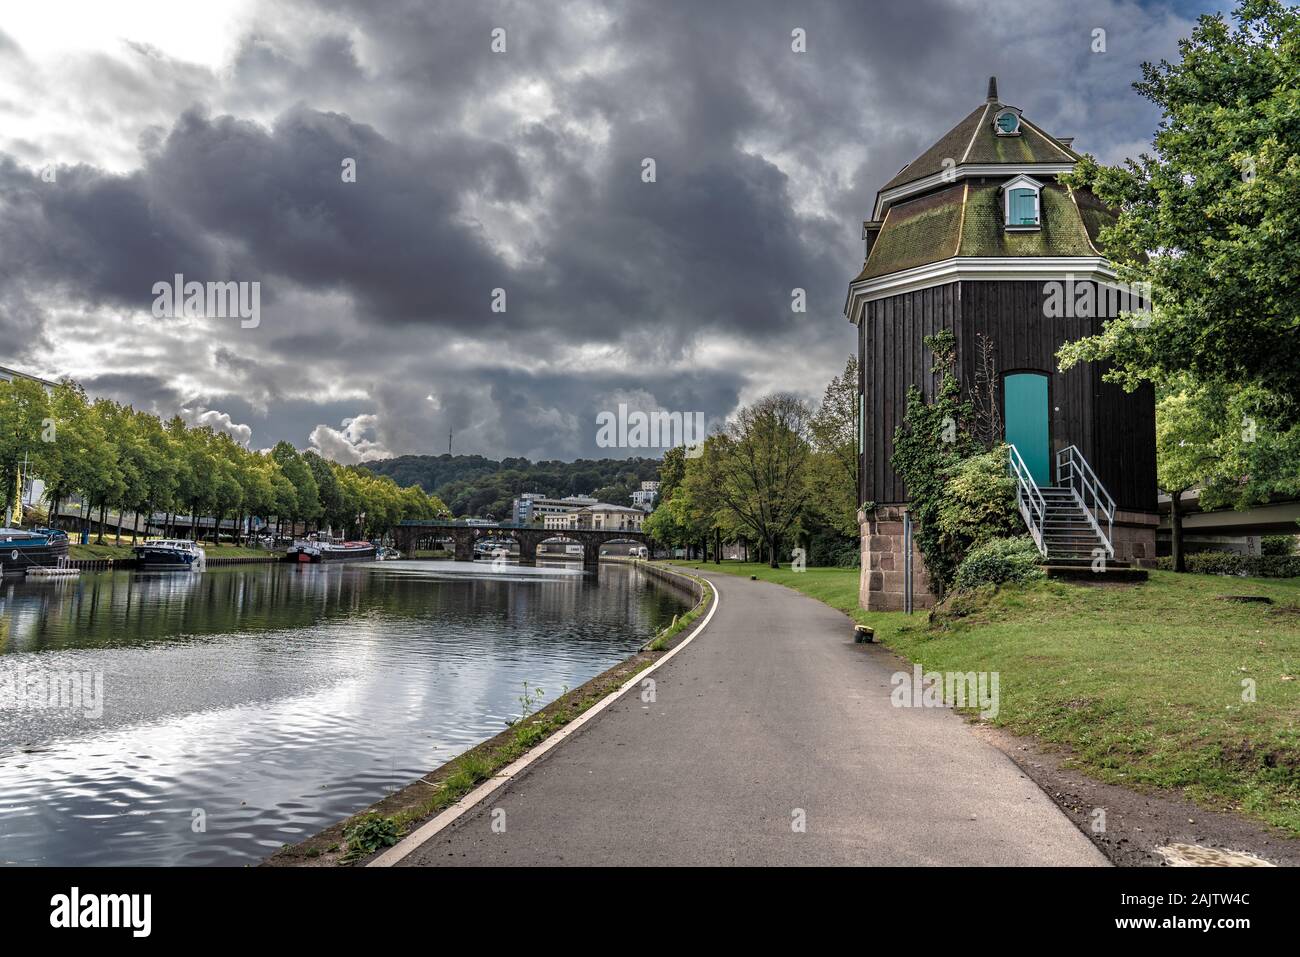 SAARBRUCKEN, GERMANY - SEPTEMBER 23: This is a view of the historic water crane building, a famous landmark along the River Saar on September 23, 2019 Stock Photo